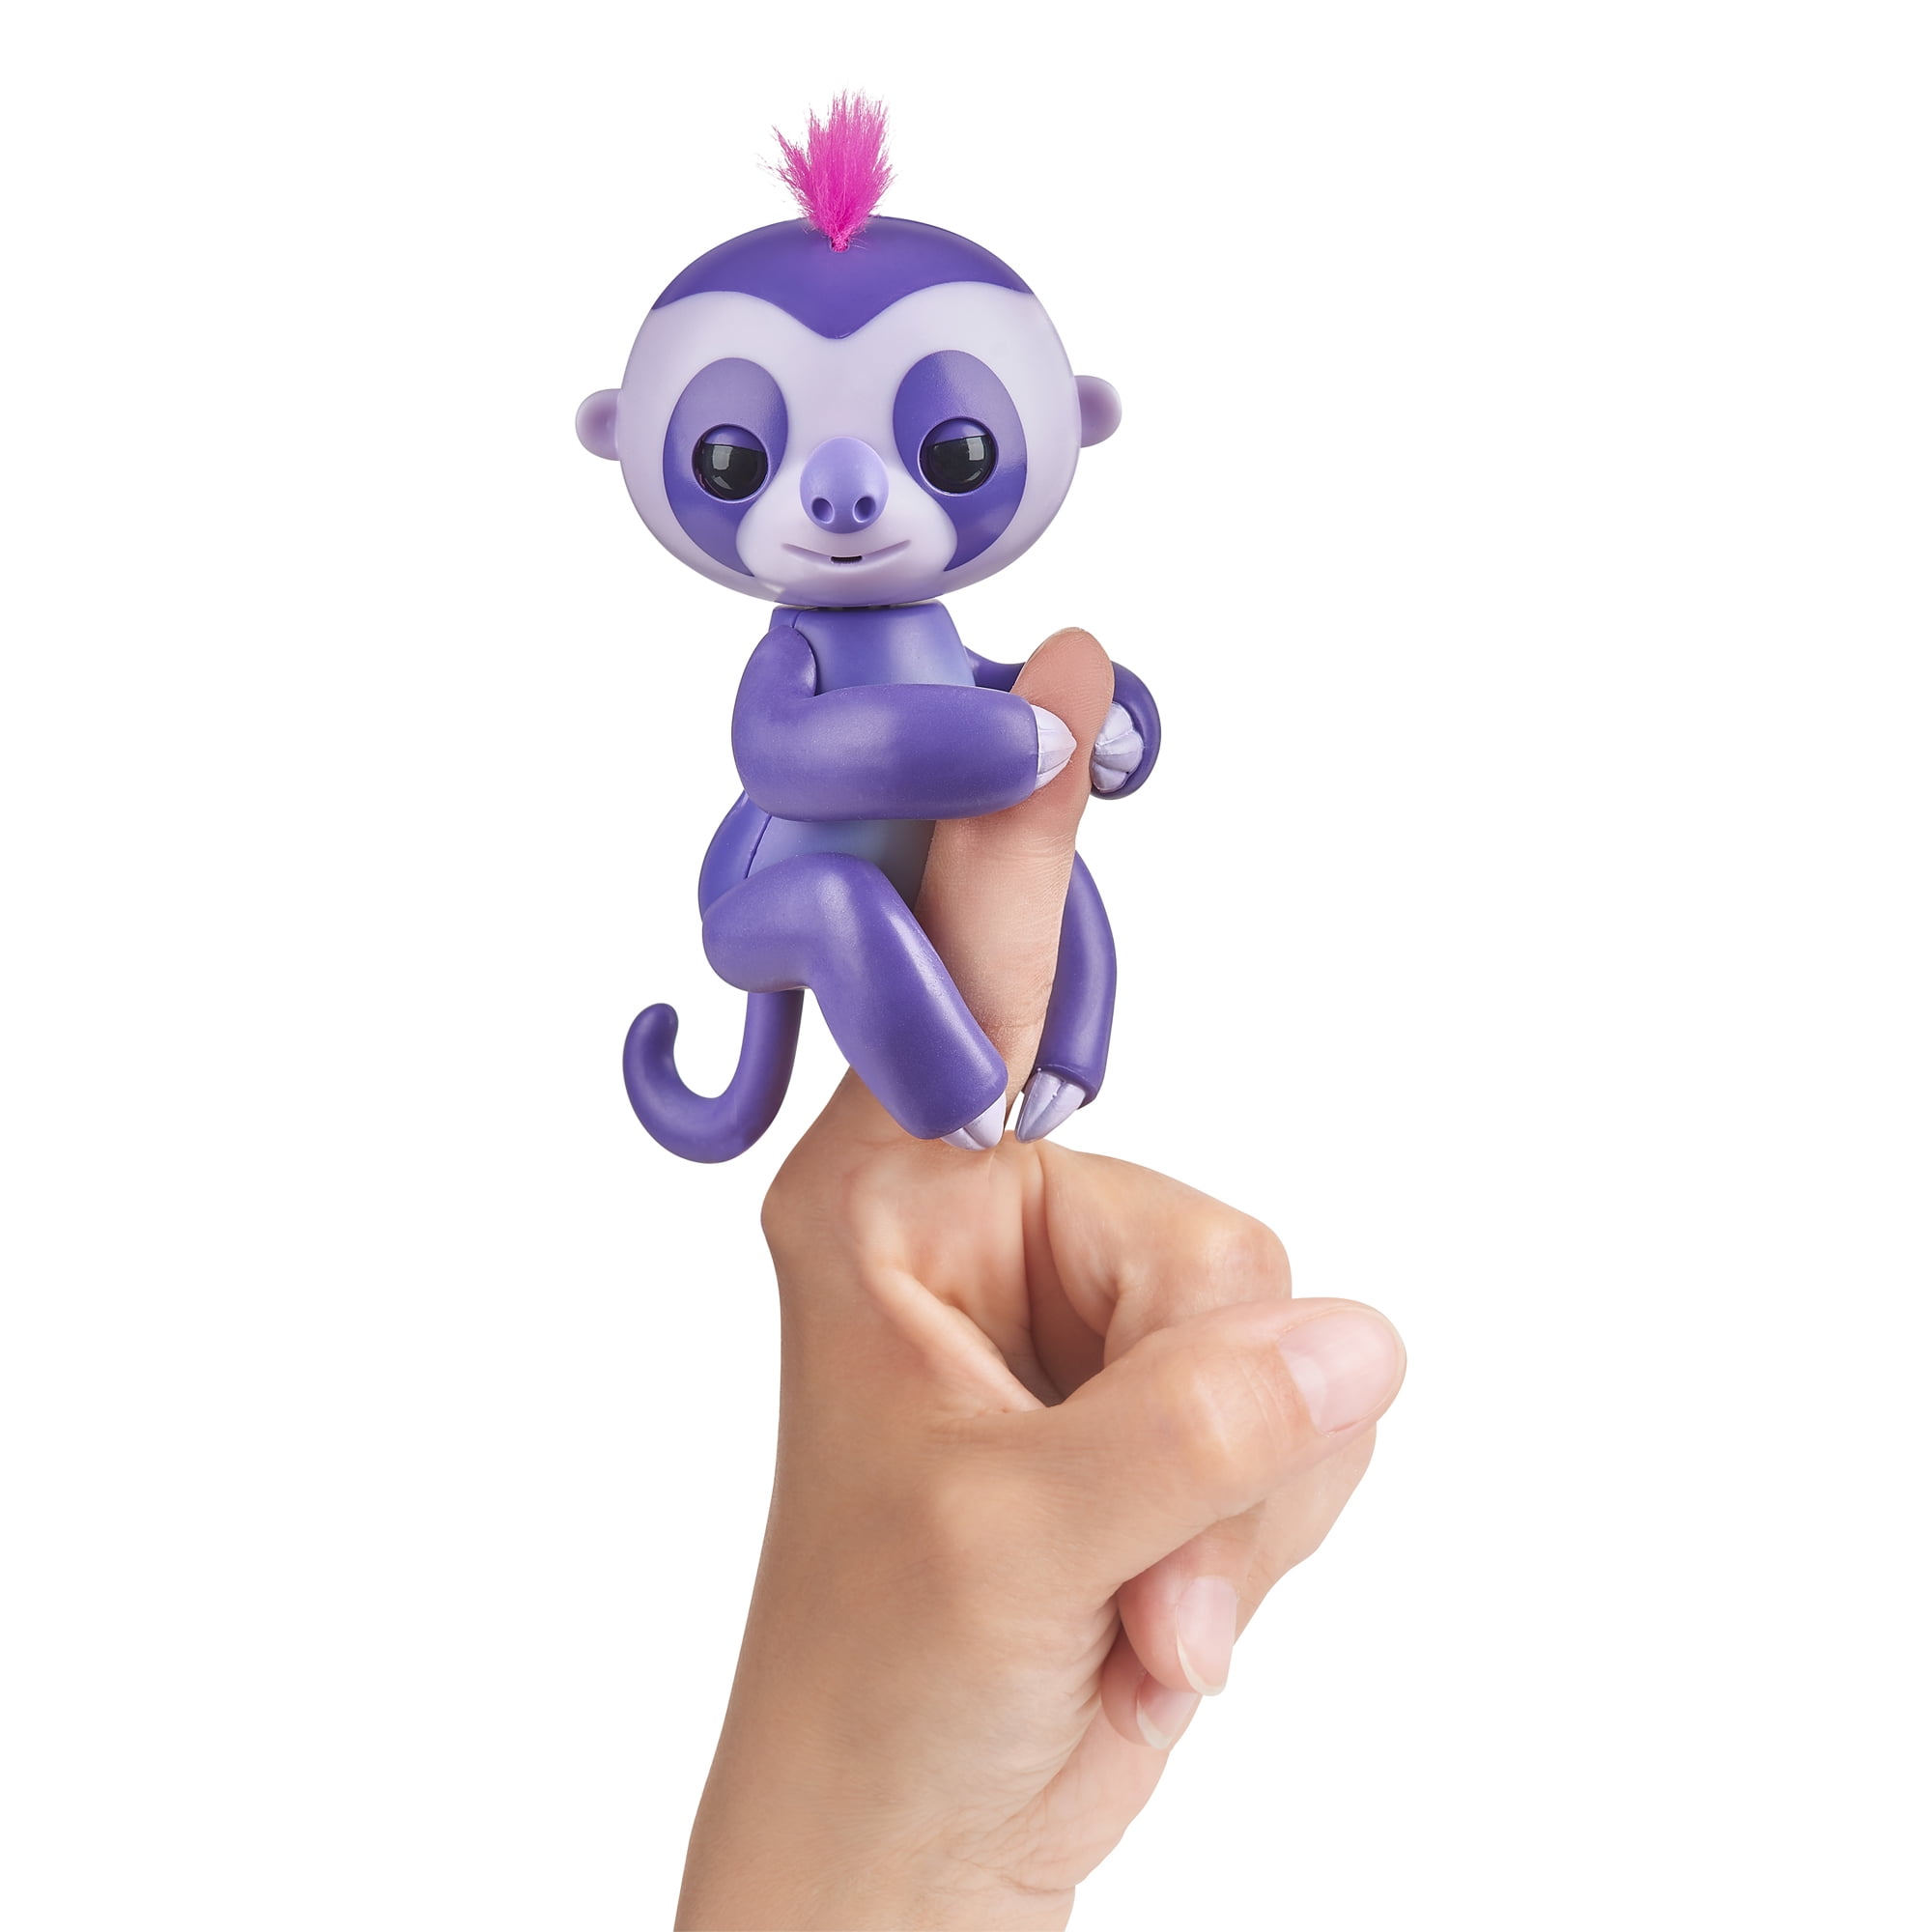 8 REPLACEMENT BATTERIES FOR WowWee FINGERLING Electronic Monkey Unicorn Sloth 